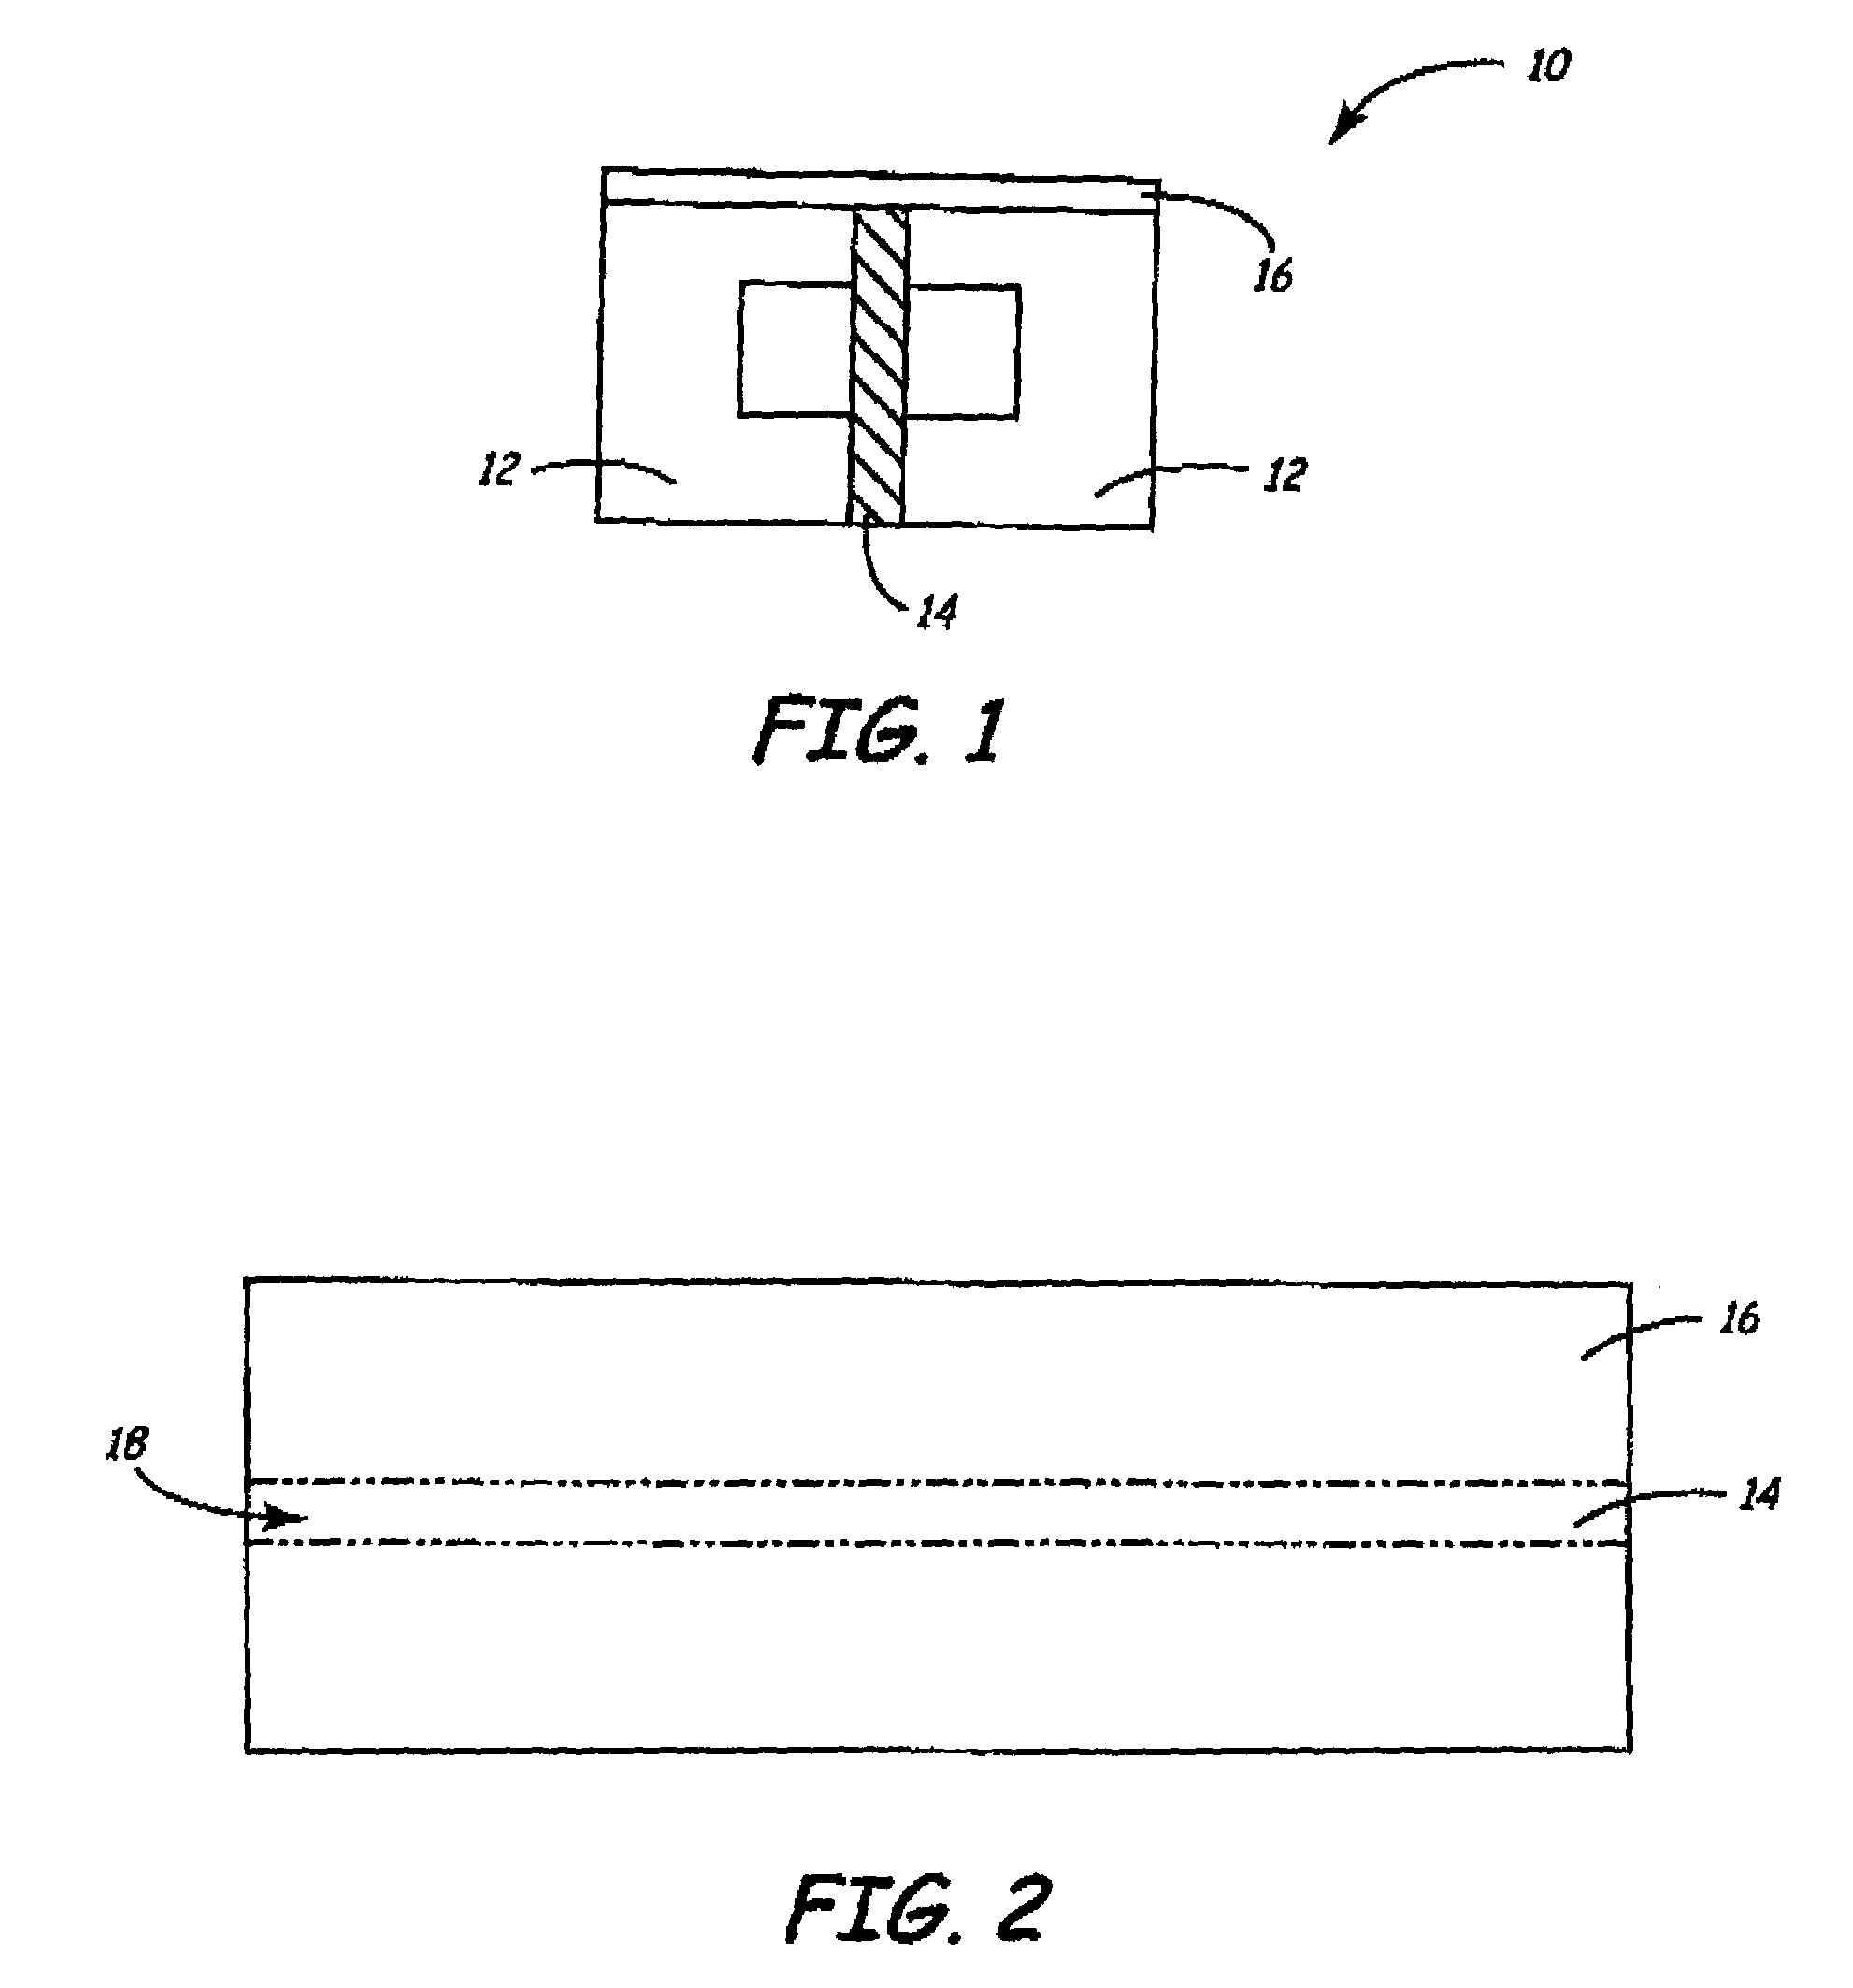 Thin-film magnetic recording head having a timing-based gap pattern for writing a servo track on magnetic media